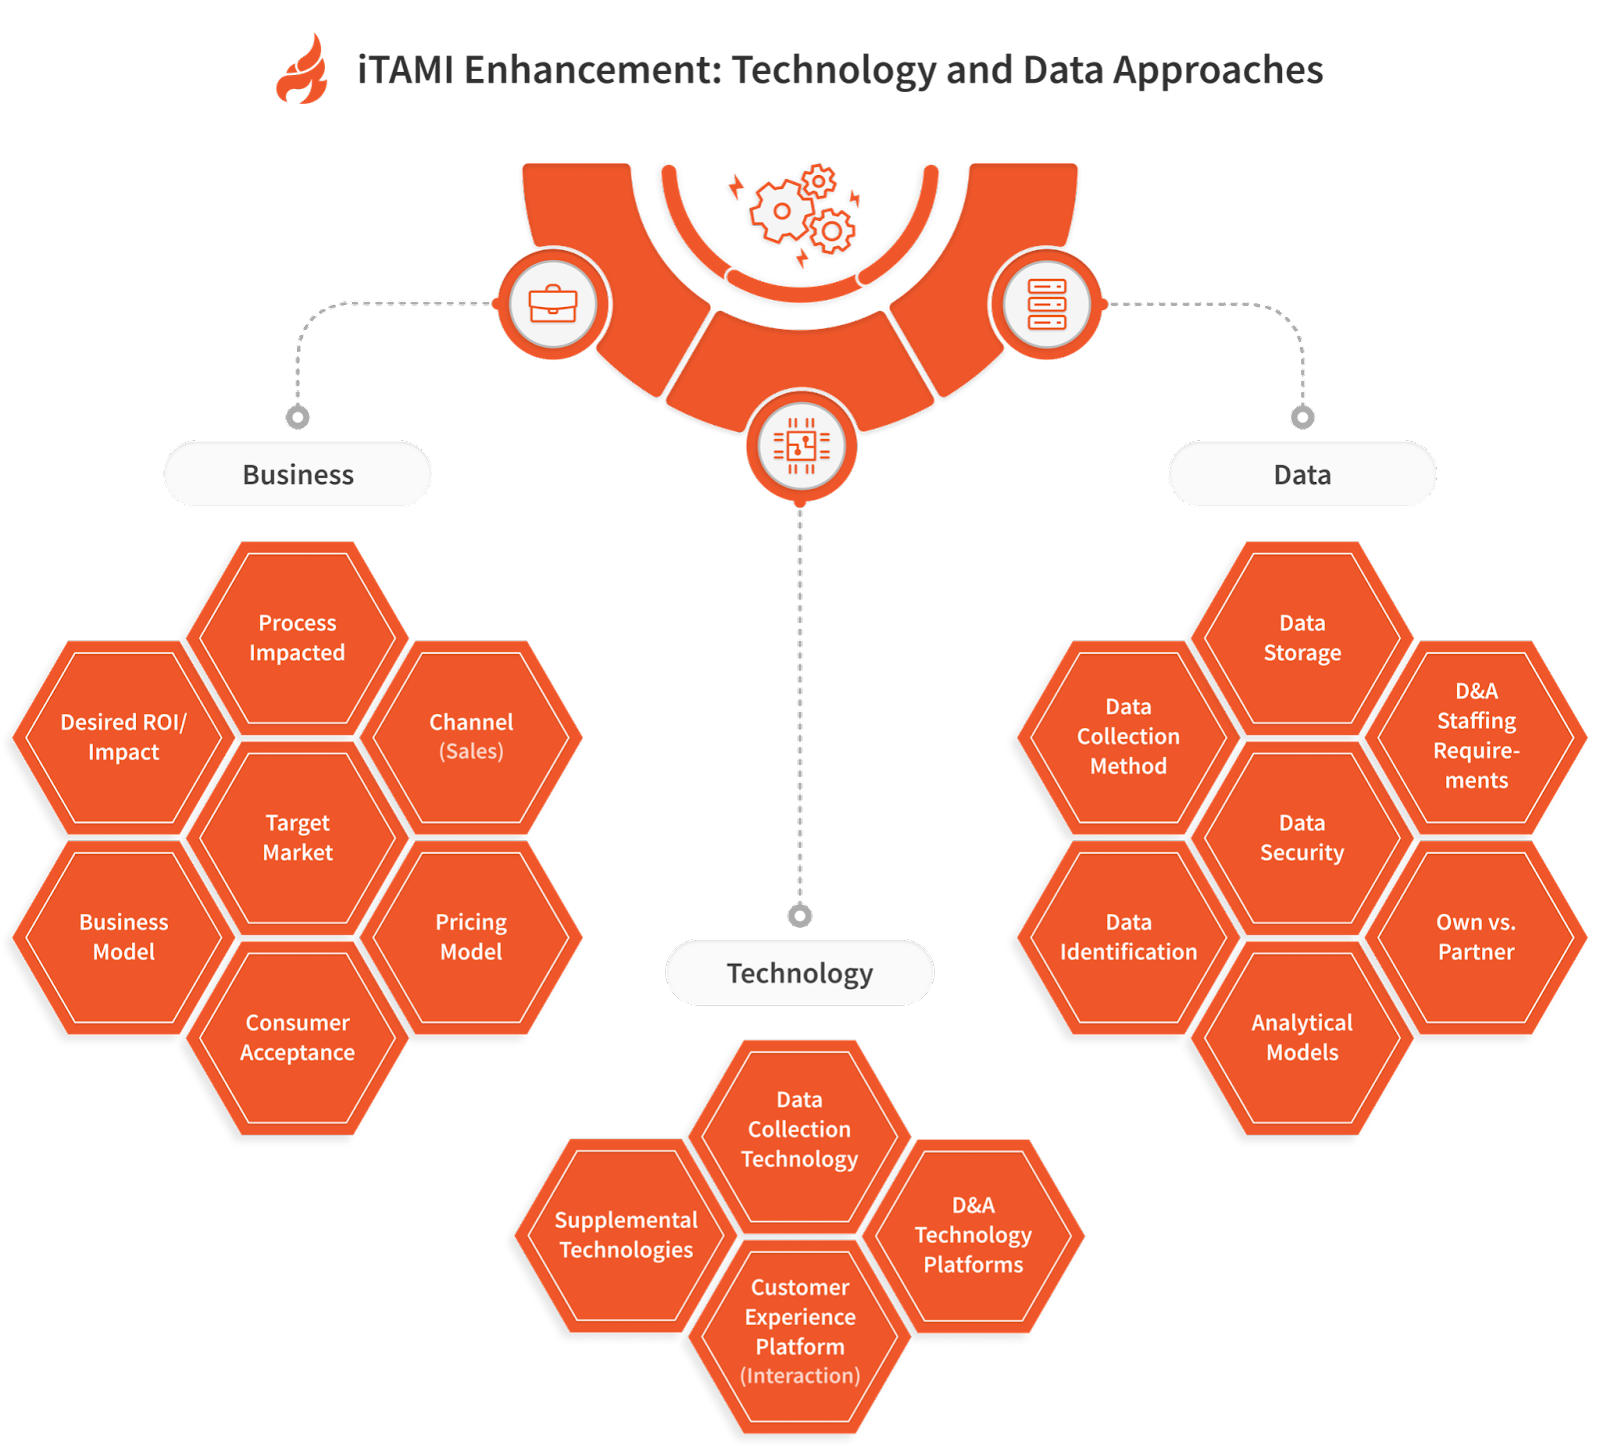 ITAMI - Enhancement Technology and Data Approaches